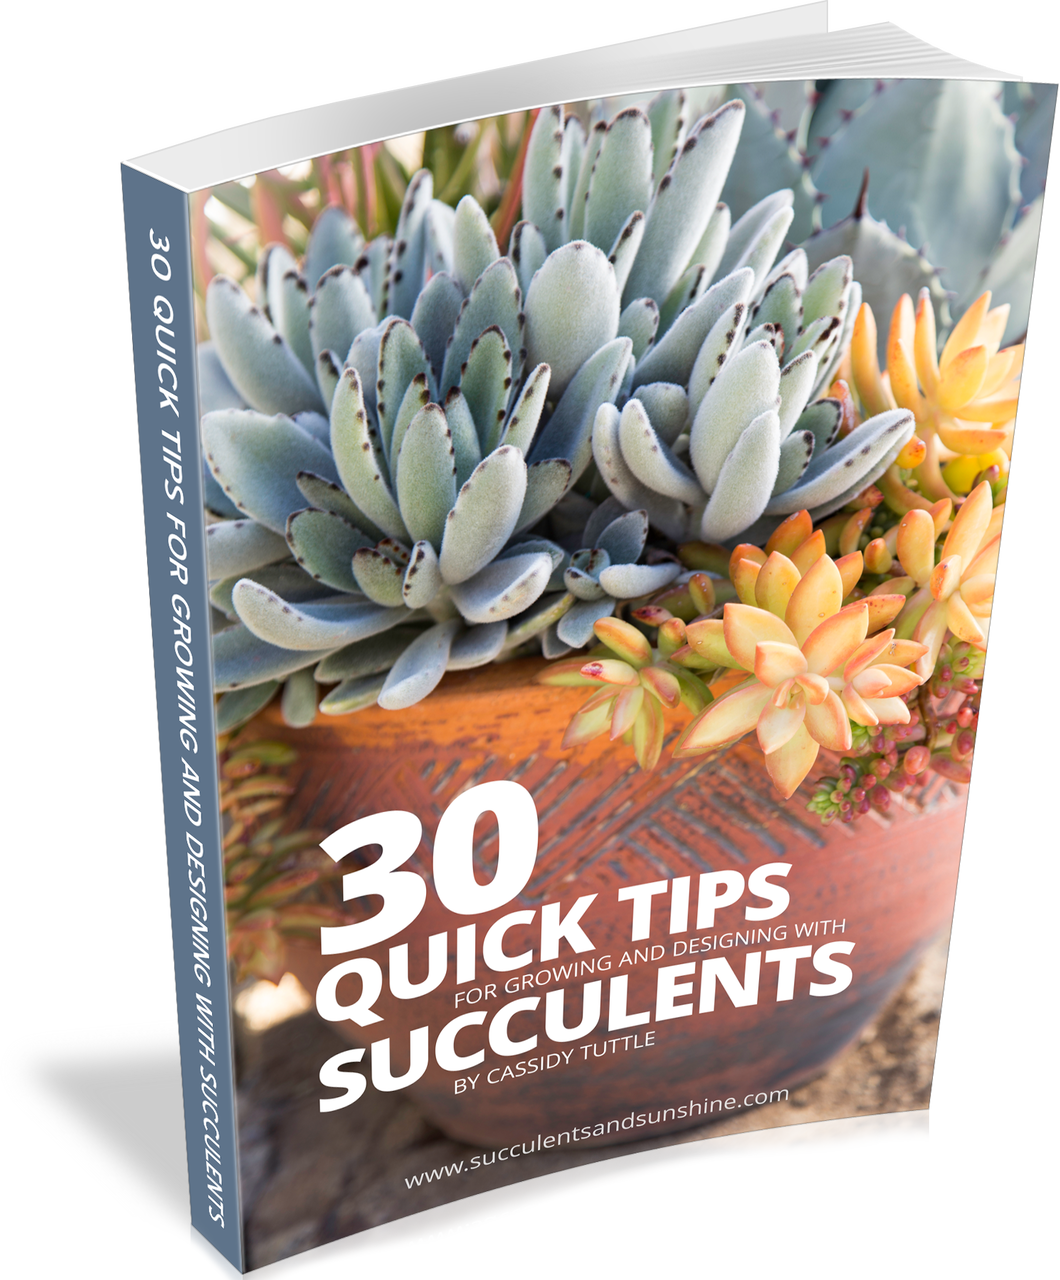 30 Quick Succulent Tips (E-Book) Questions & Answers